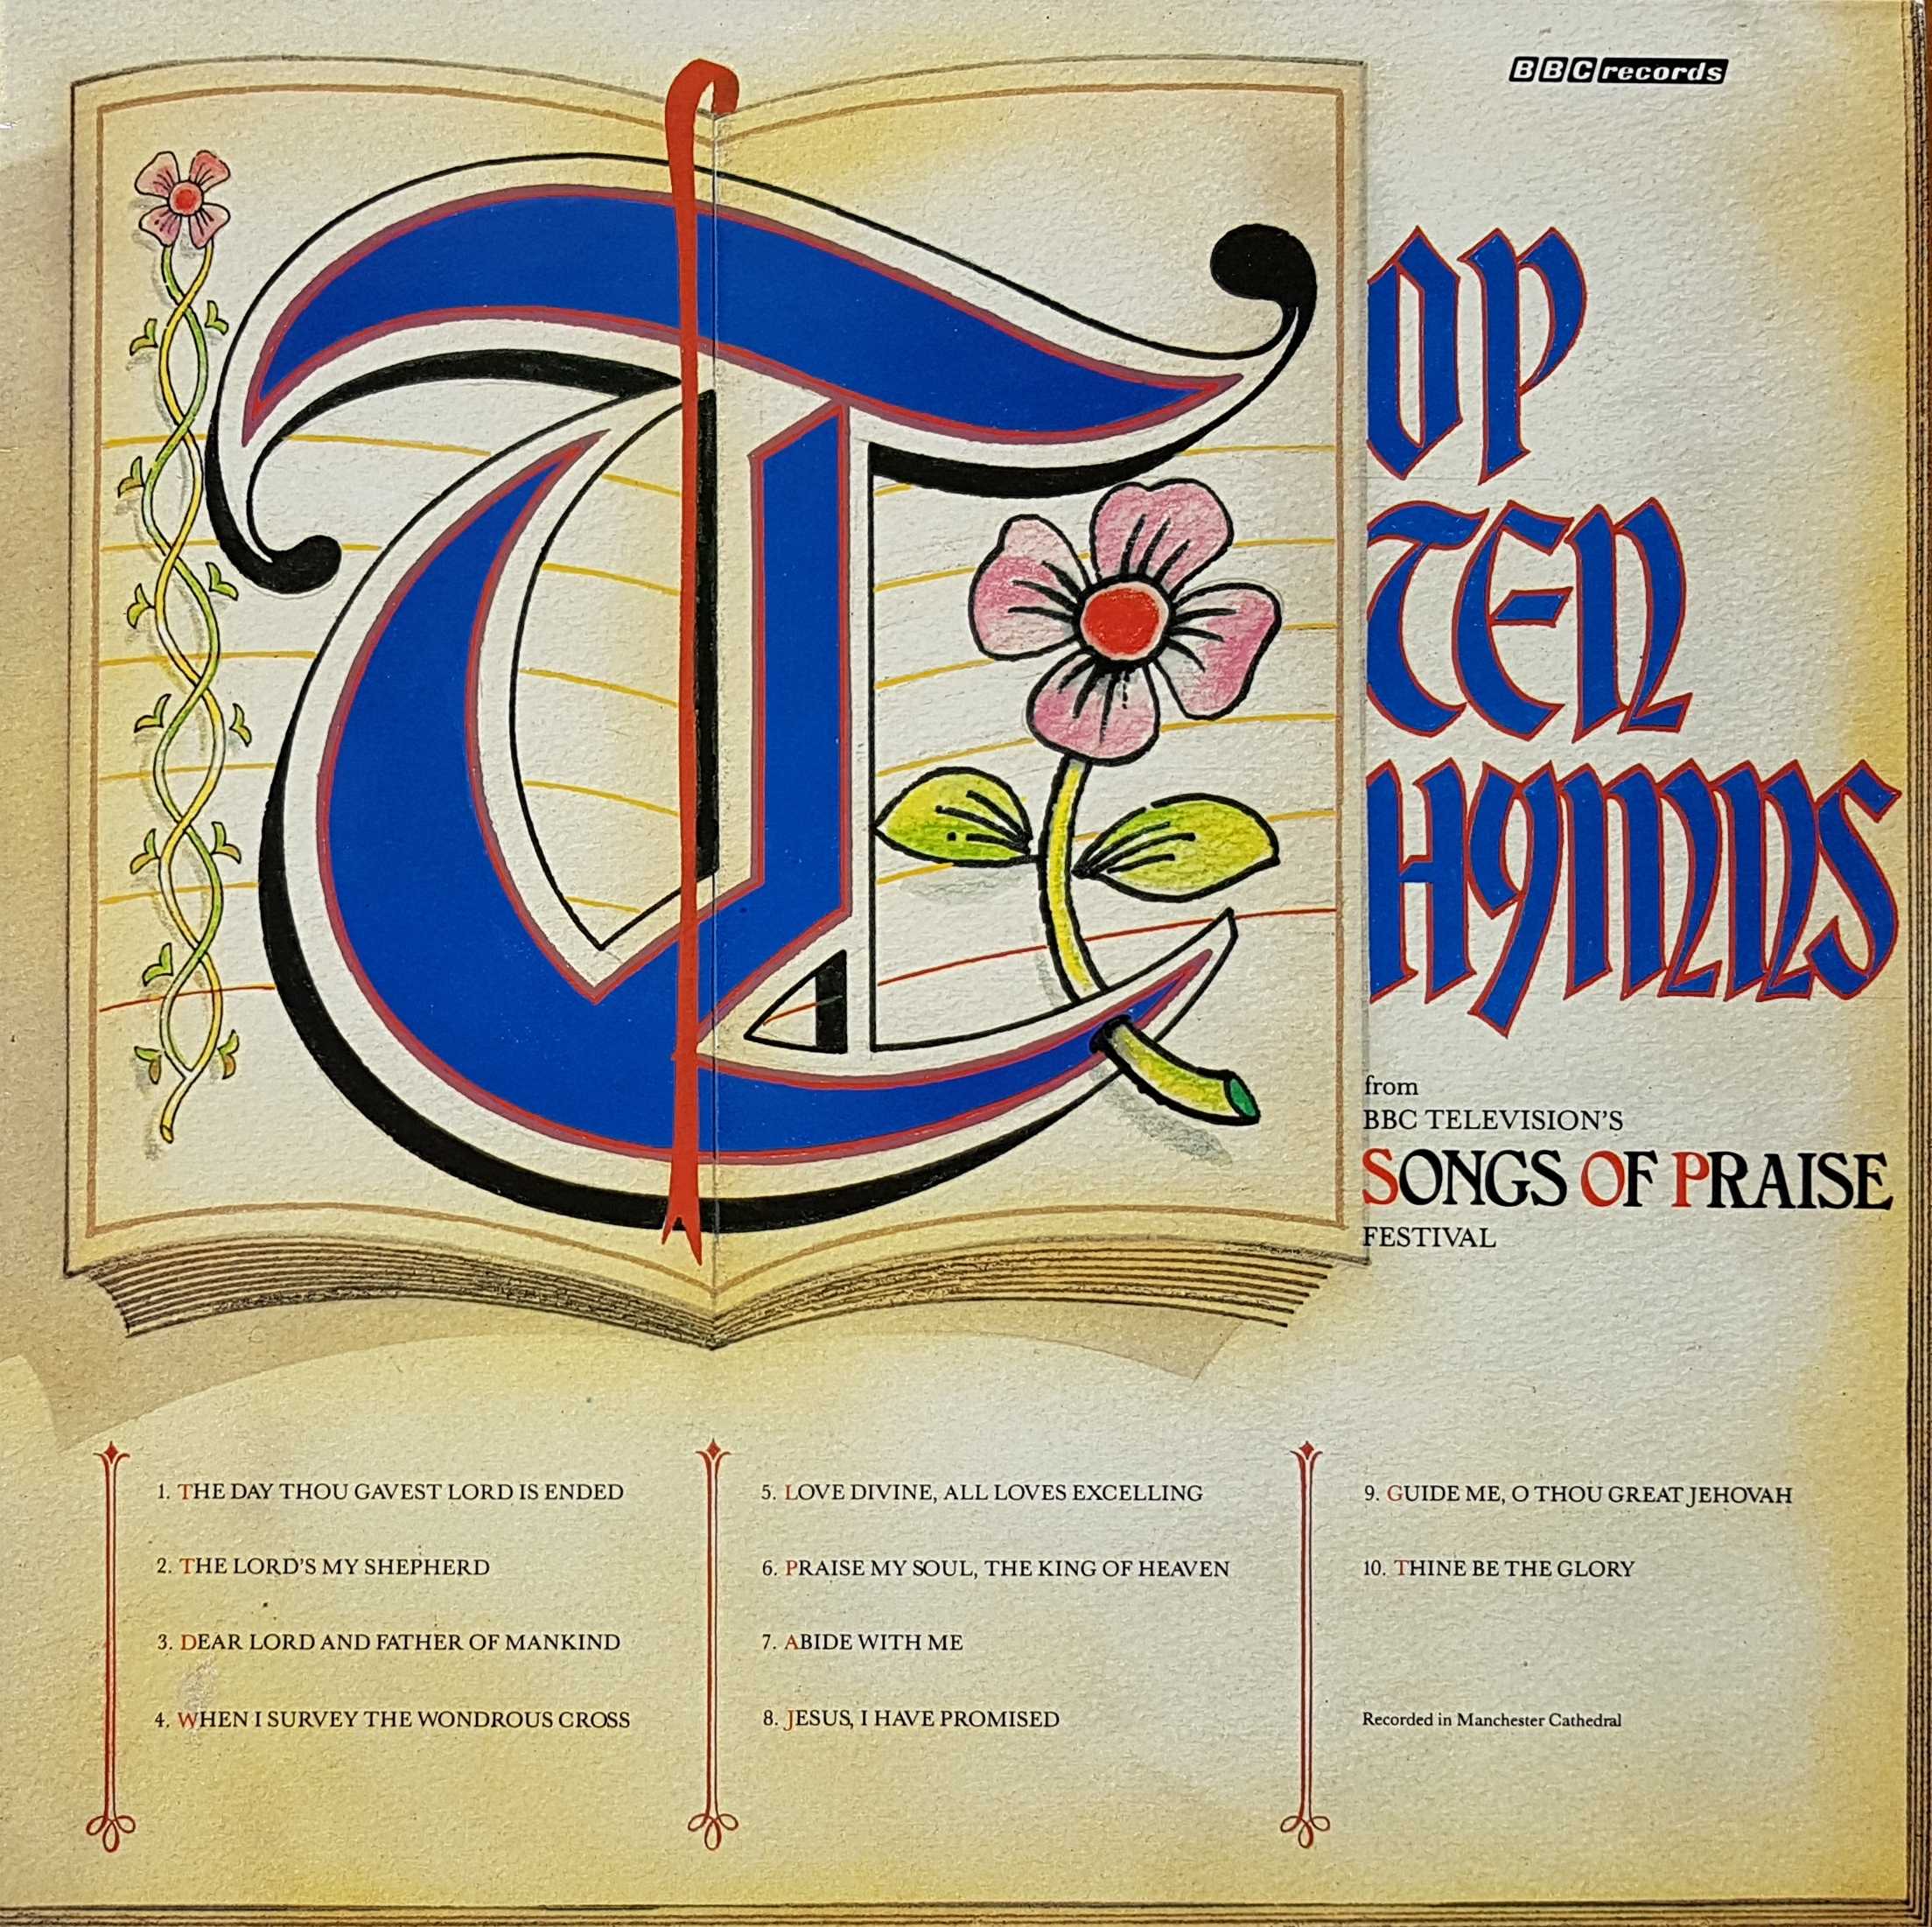 Picture of REC 556 Top ten hymns by artist Various from the BBC albums - Records and Tapes library